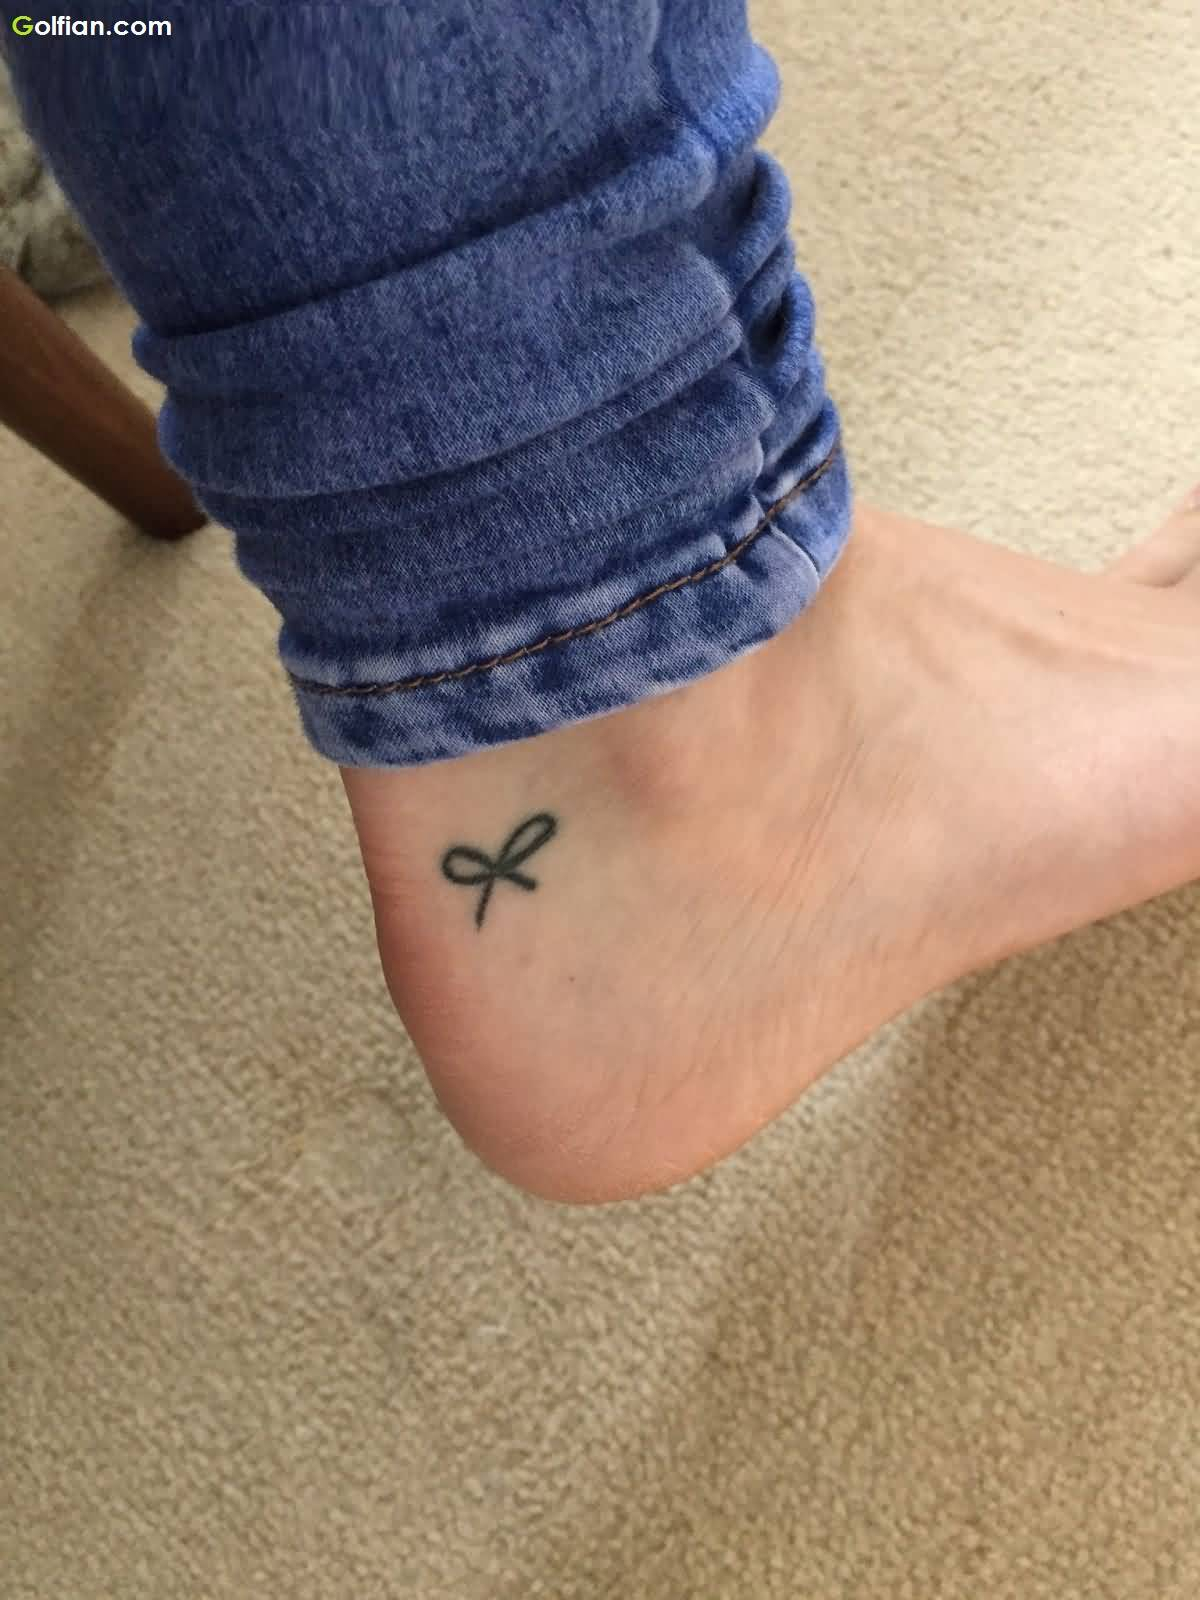 Outstanding Bow Tattoo Outline On Ankle Golfian inside size 1200 X 1600